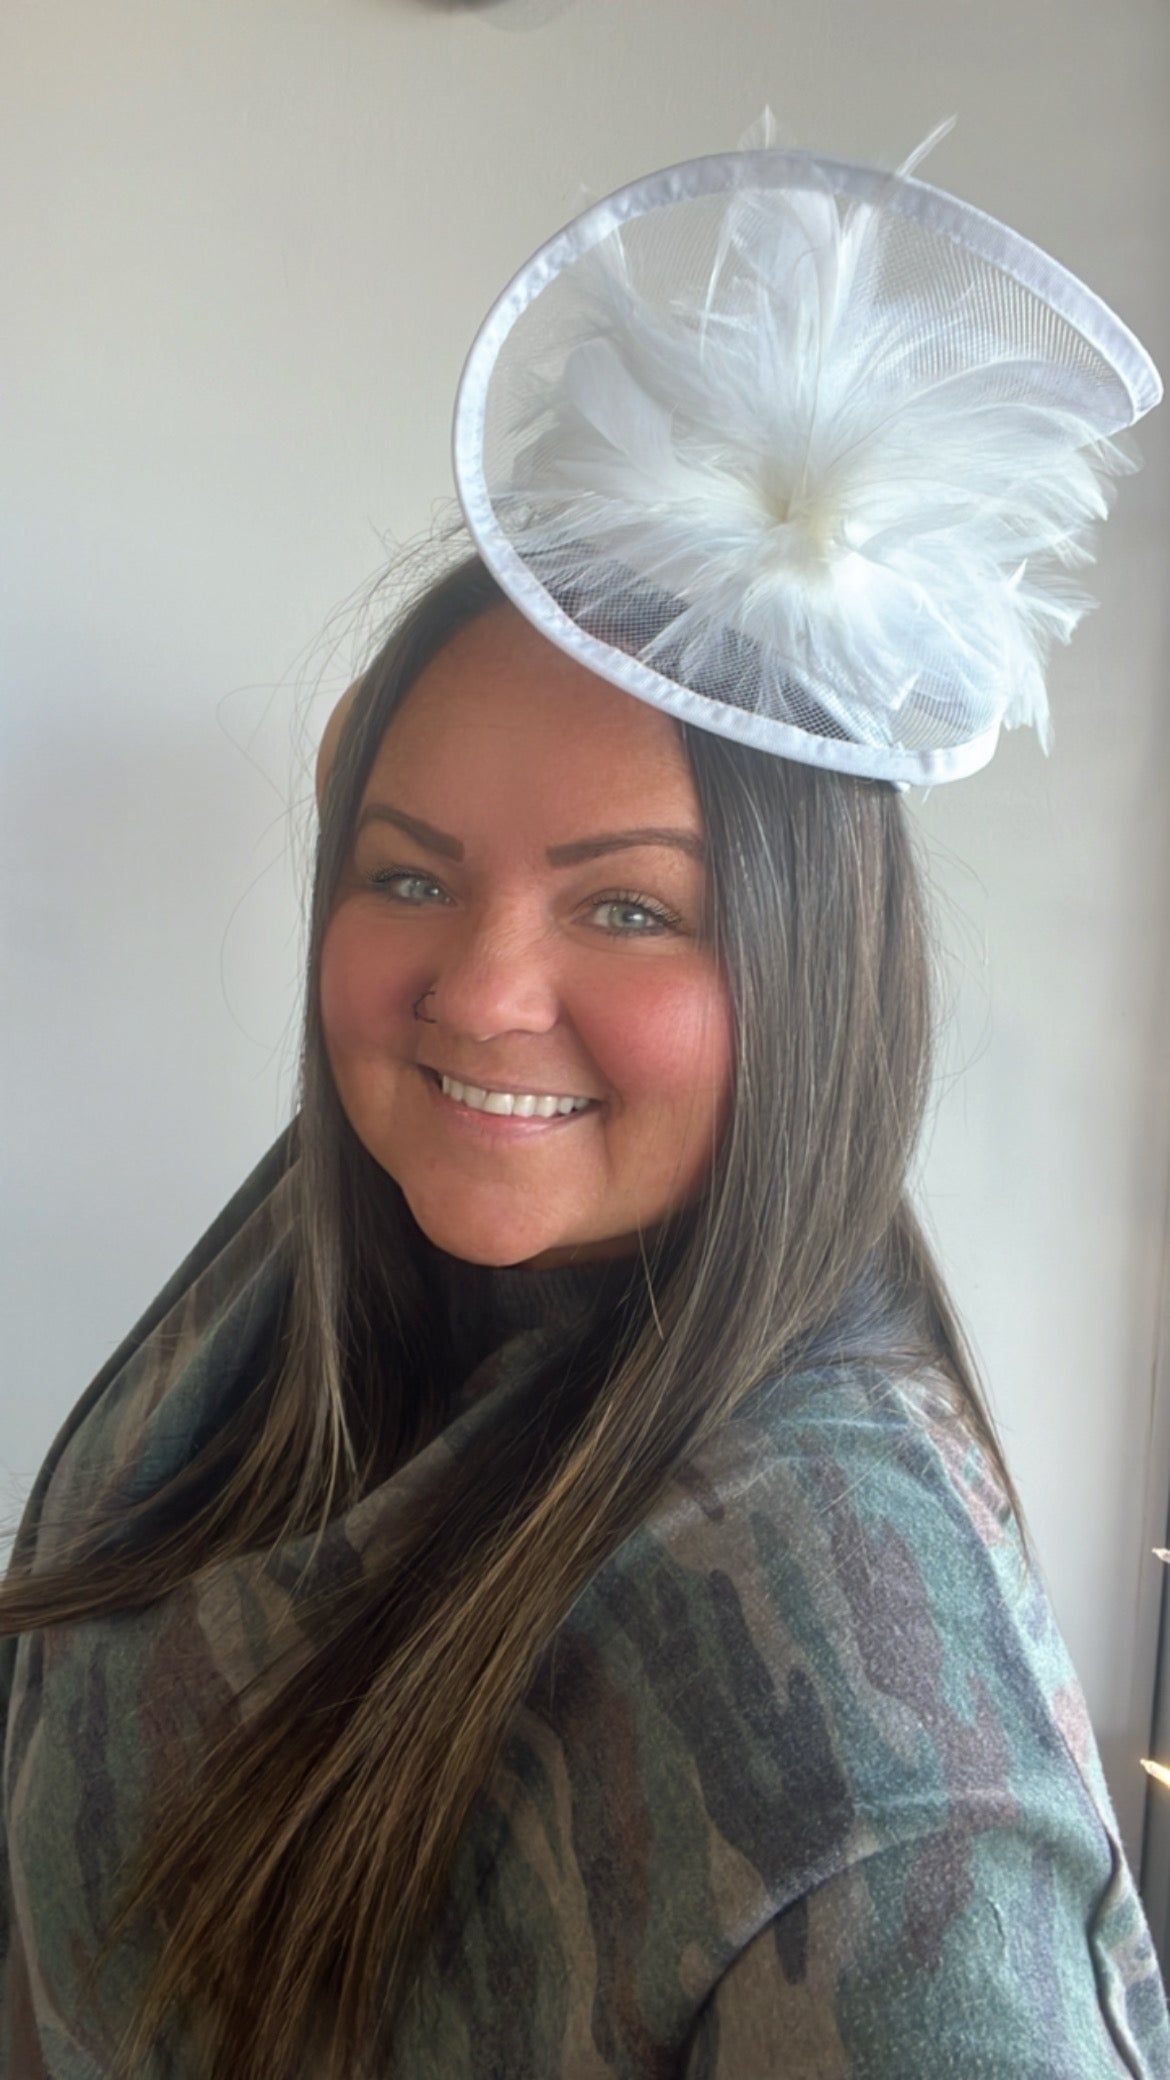 Double victory fascinator